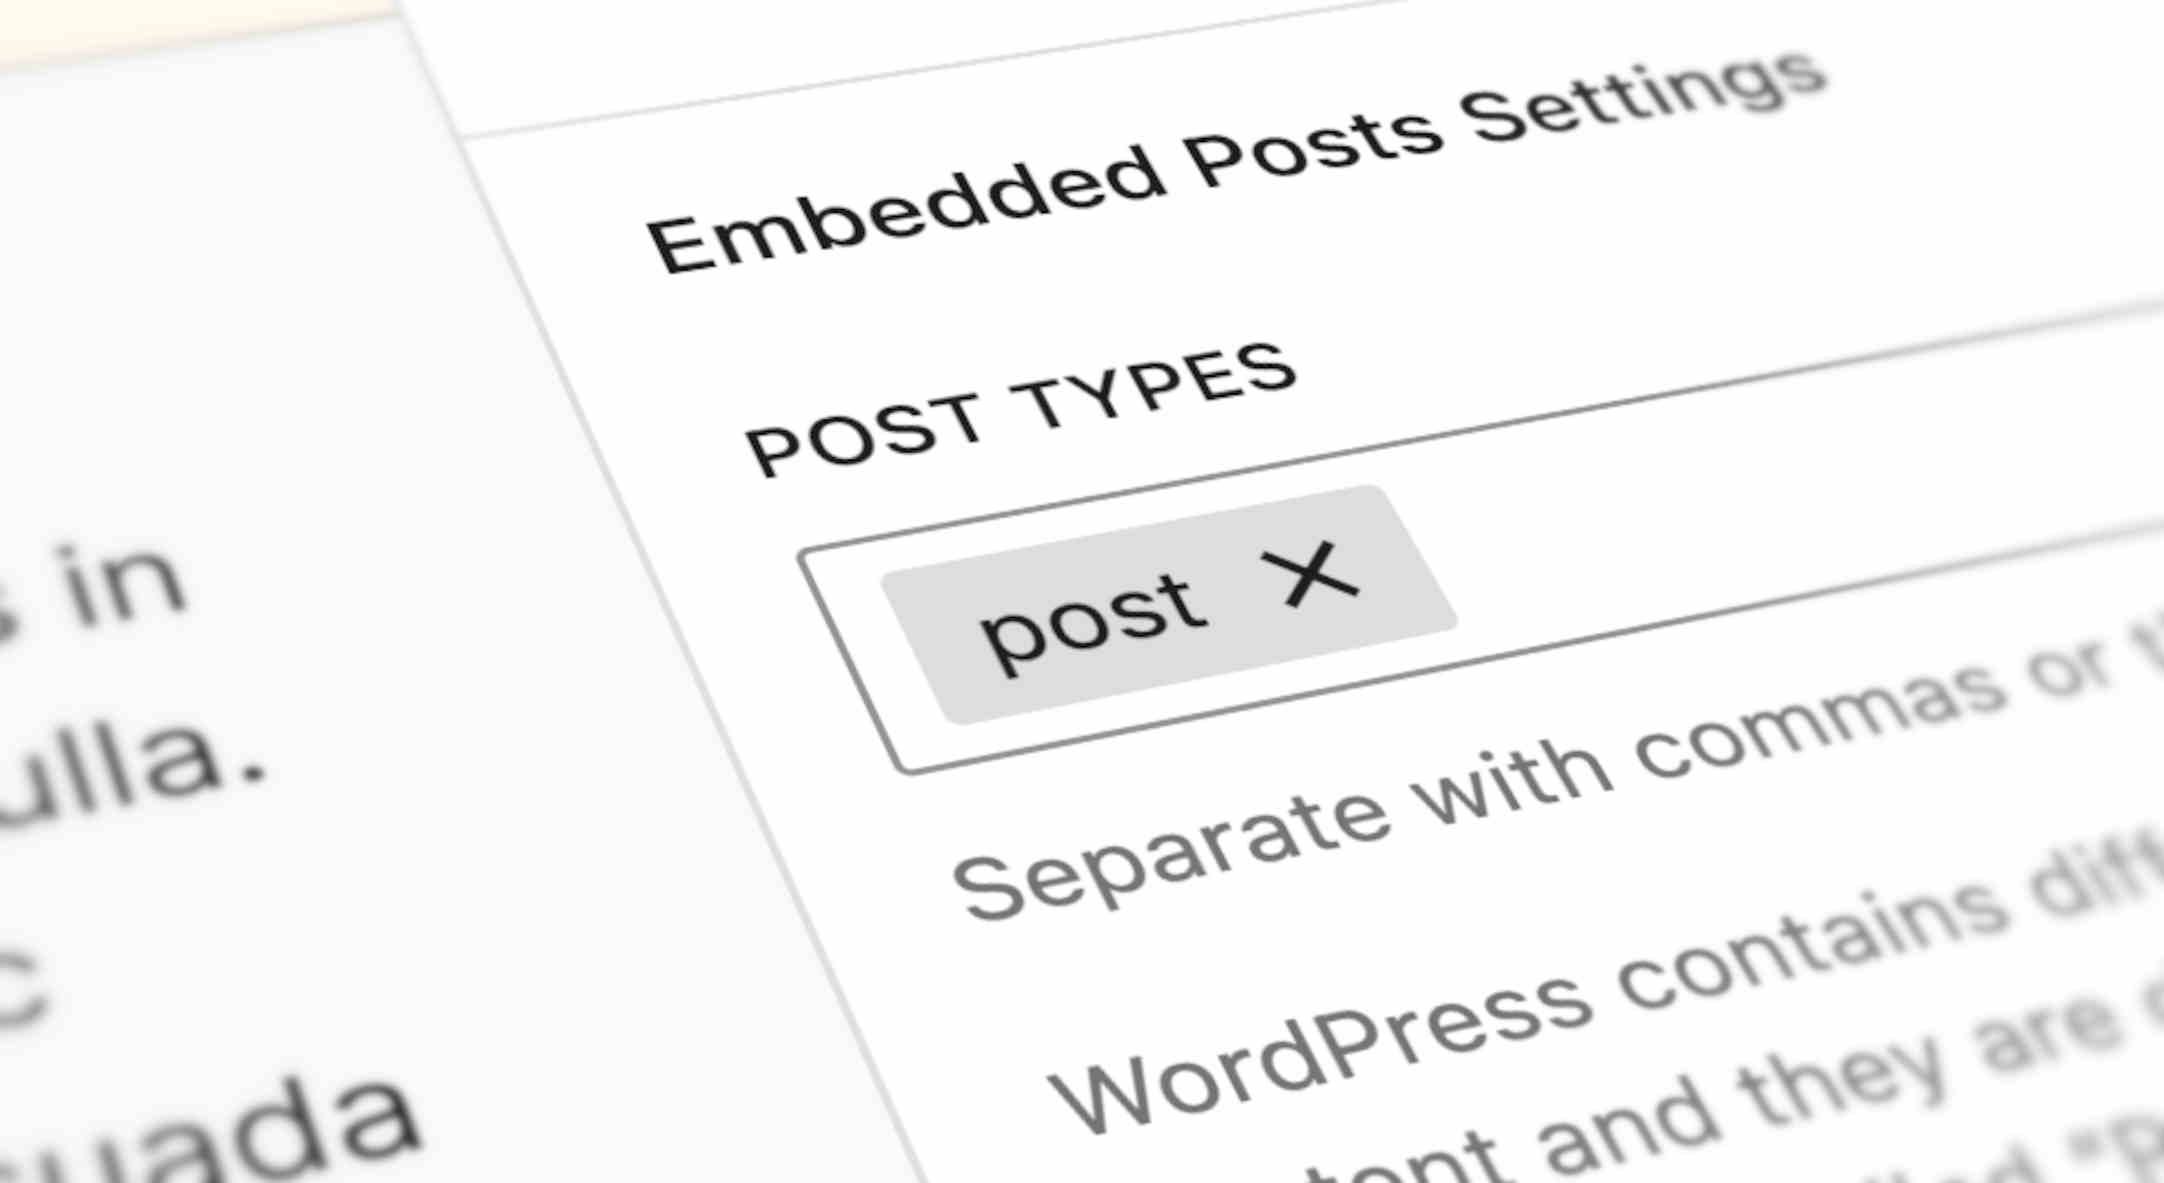 Stylised screenshot of Post Types settings for Embedded Posts